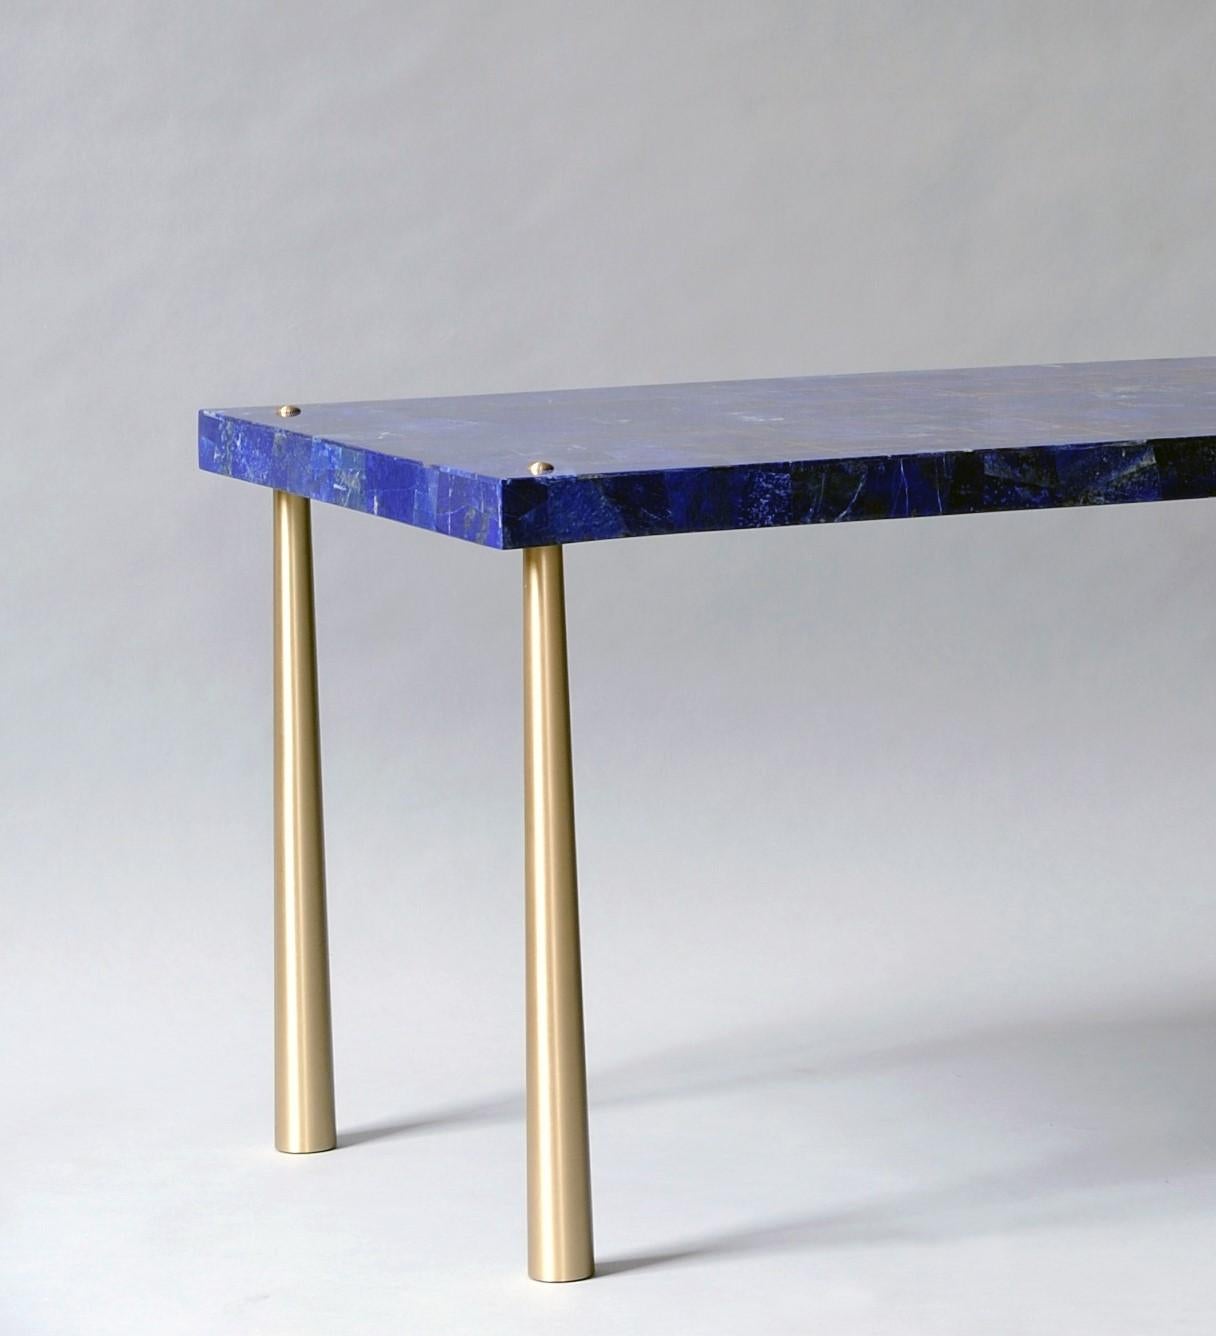 Mid-Century Modern Azure Coffee or Cocktail Table by DeMuro Das in Lapis Lazuli and Brass Inlay